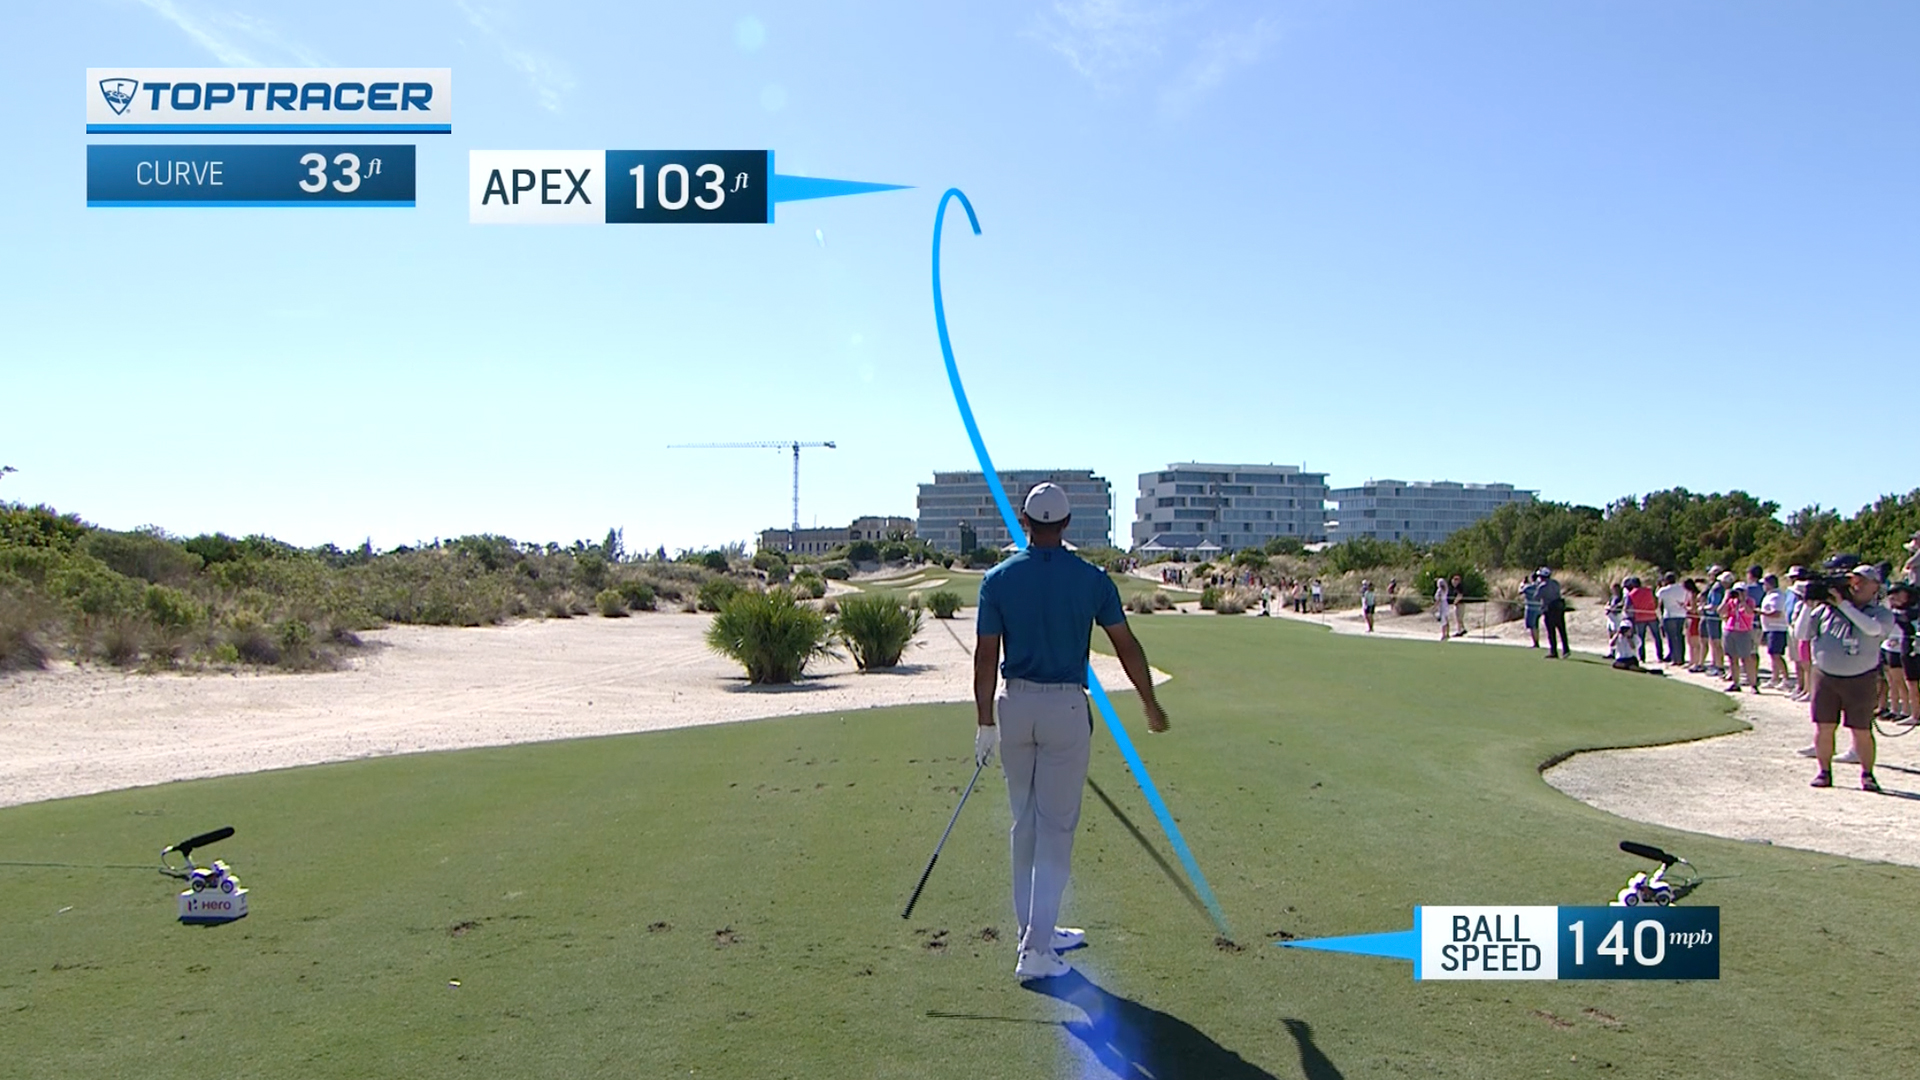 Toptracer on TV